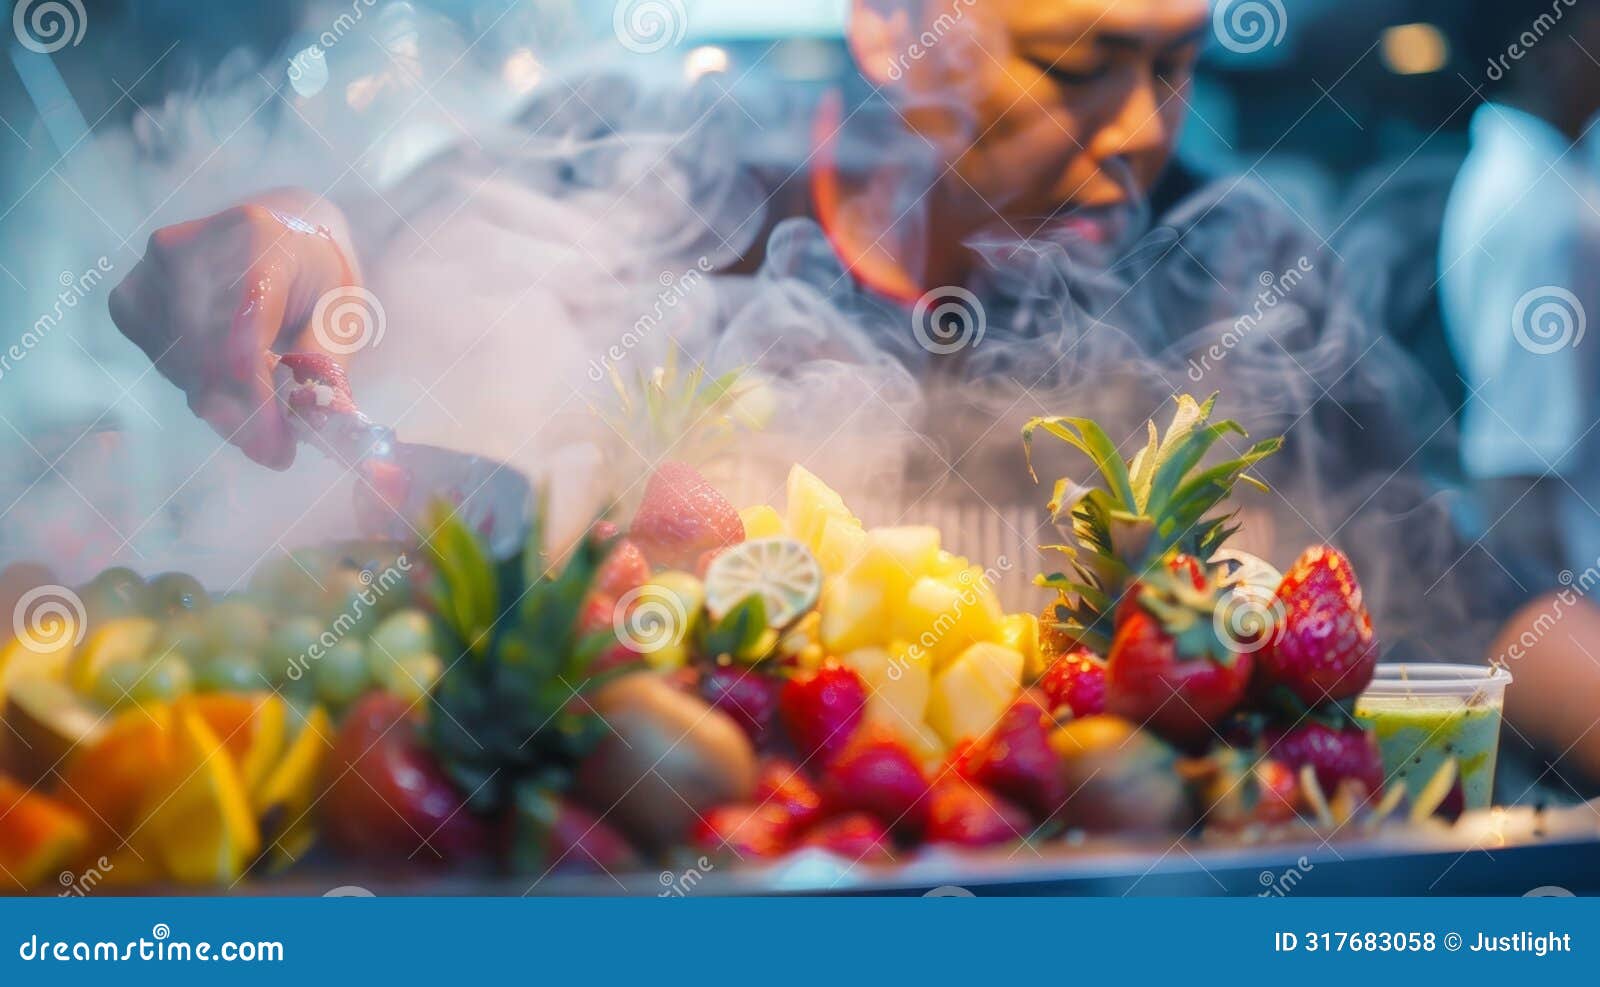 the air is filled with the enticing aromas of fresh fruits as competitors chop and squeeze ingredients for their exotic